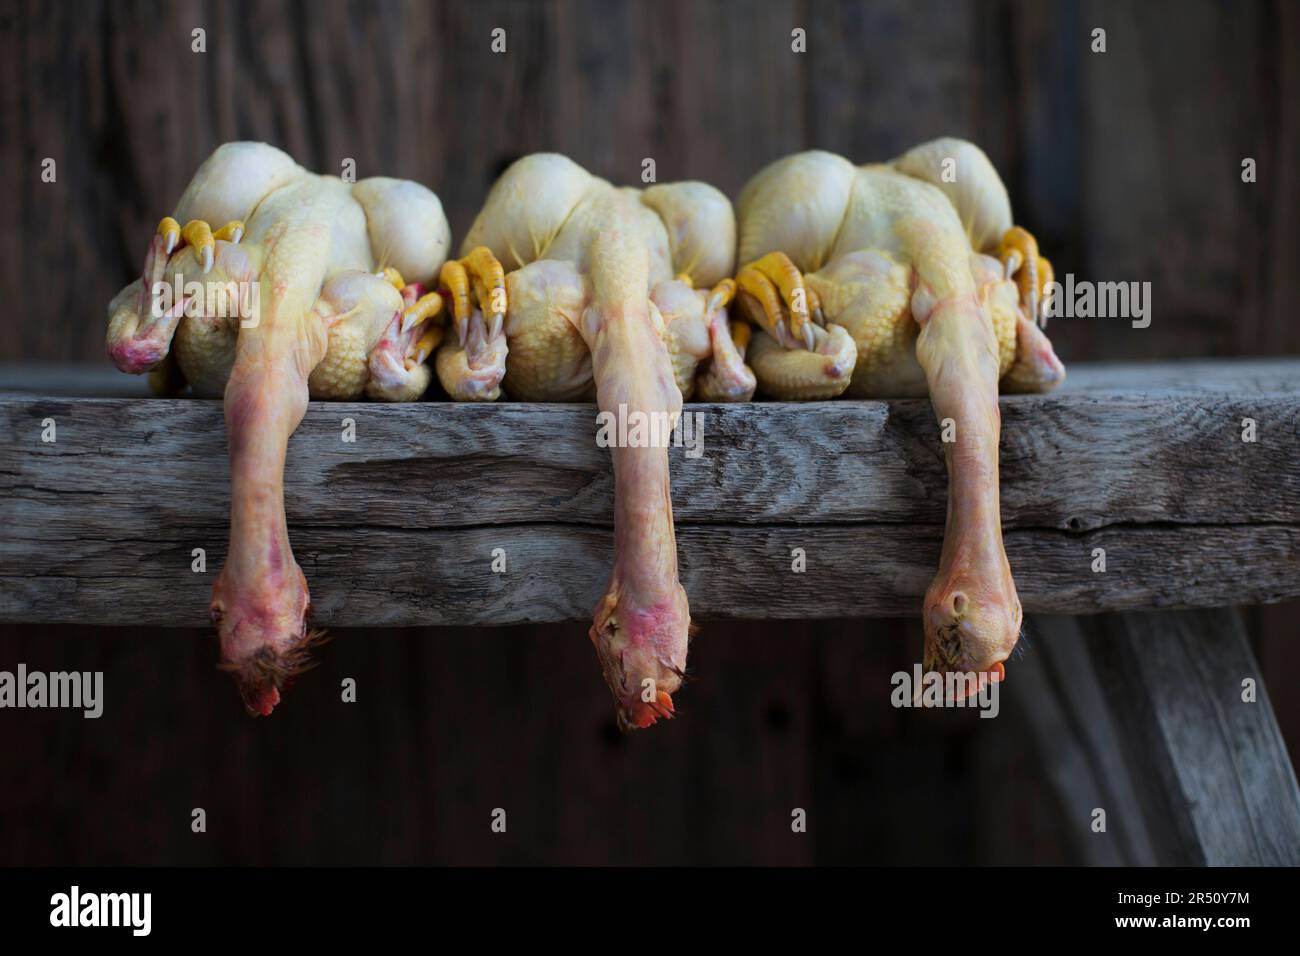 Three plucked chickens on wooden table Stock Photo